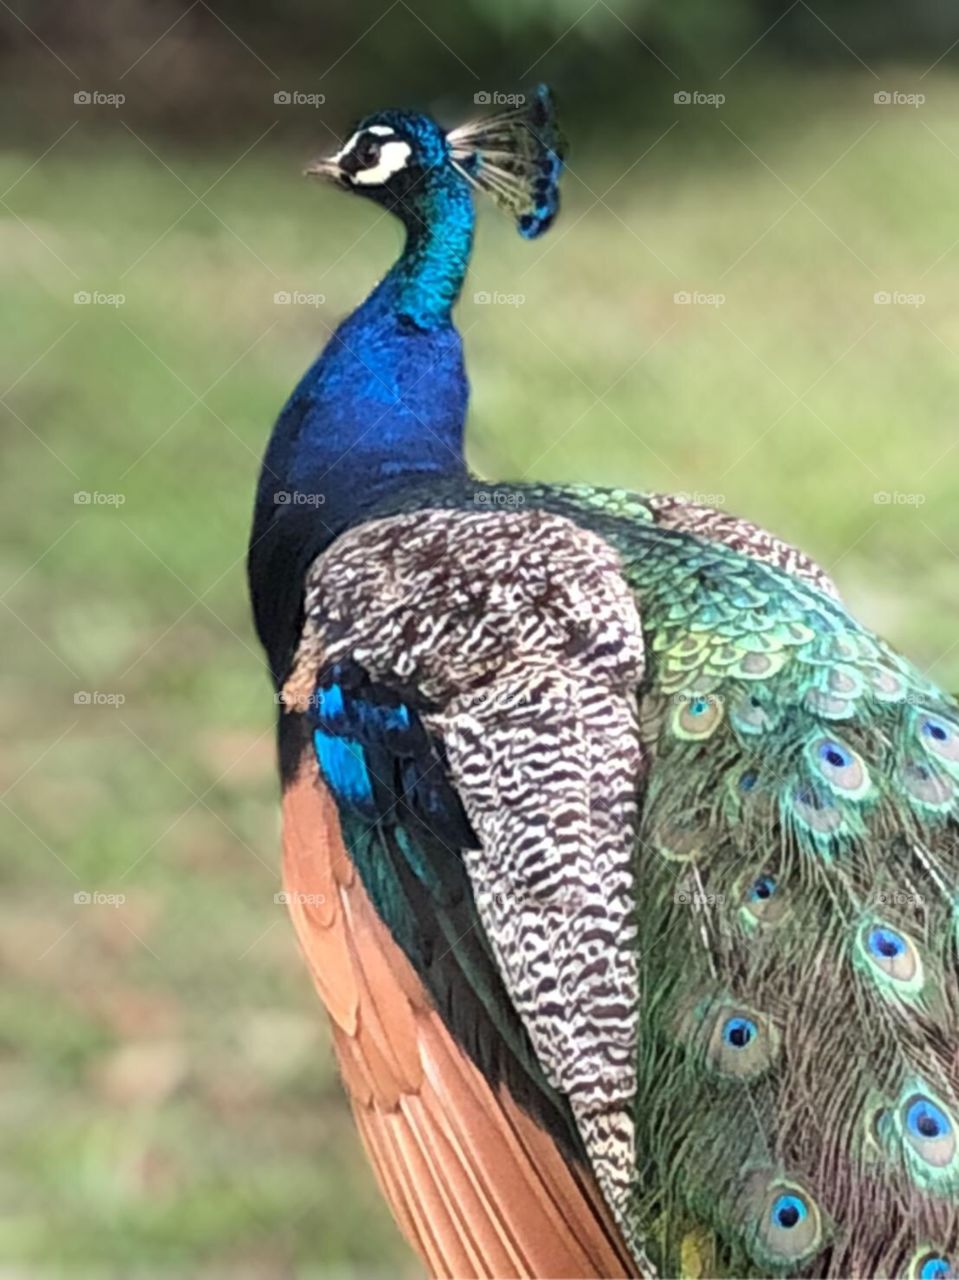 Peacock | Peacock Feathers, Wildlife, Natural Habitat, Blurry, Blurred Background, In Focus, Up Close, Nature, Bird, Big Bird, Feathers, Feather, Colorful, Bright, Tail